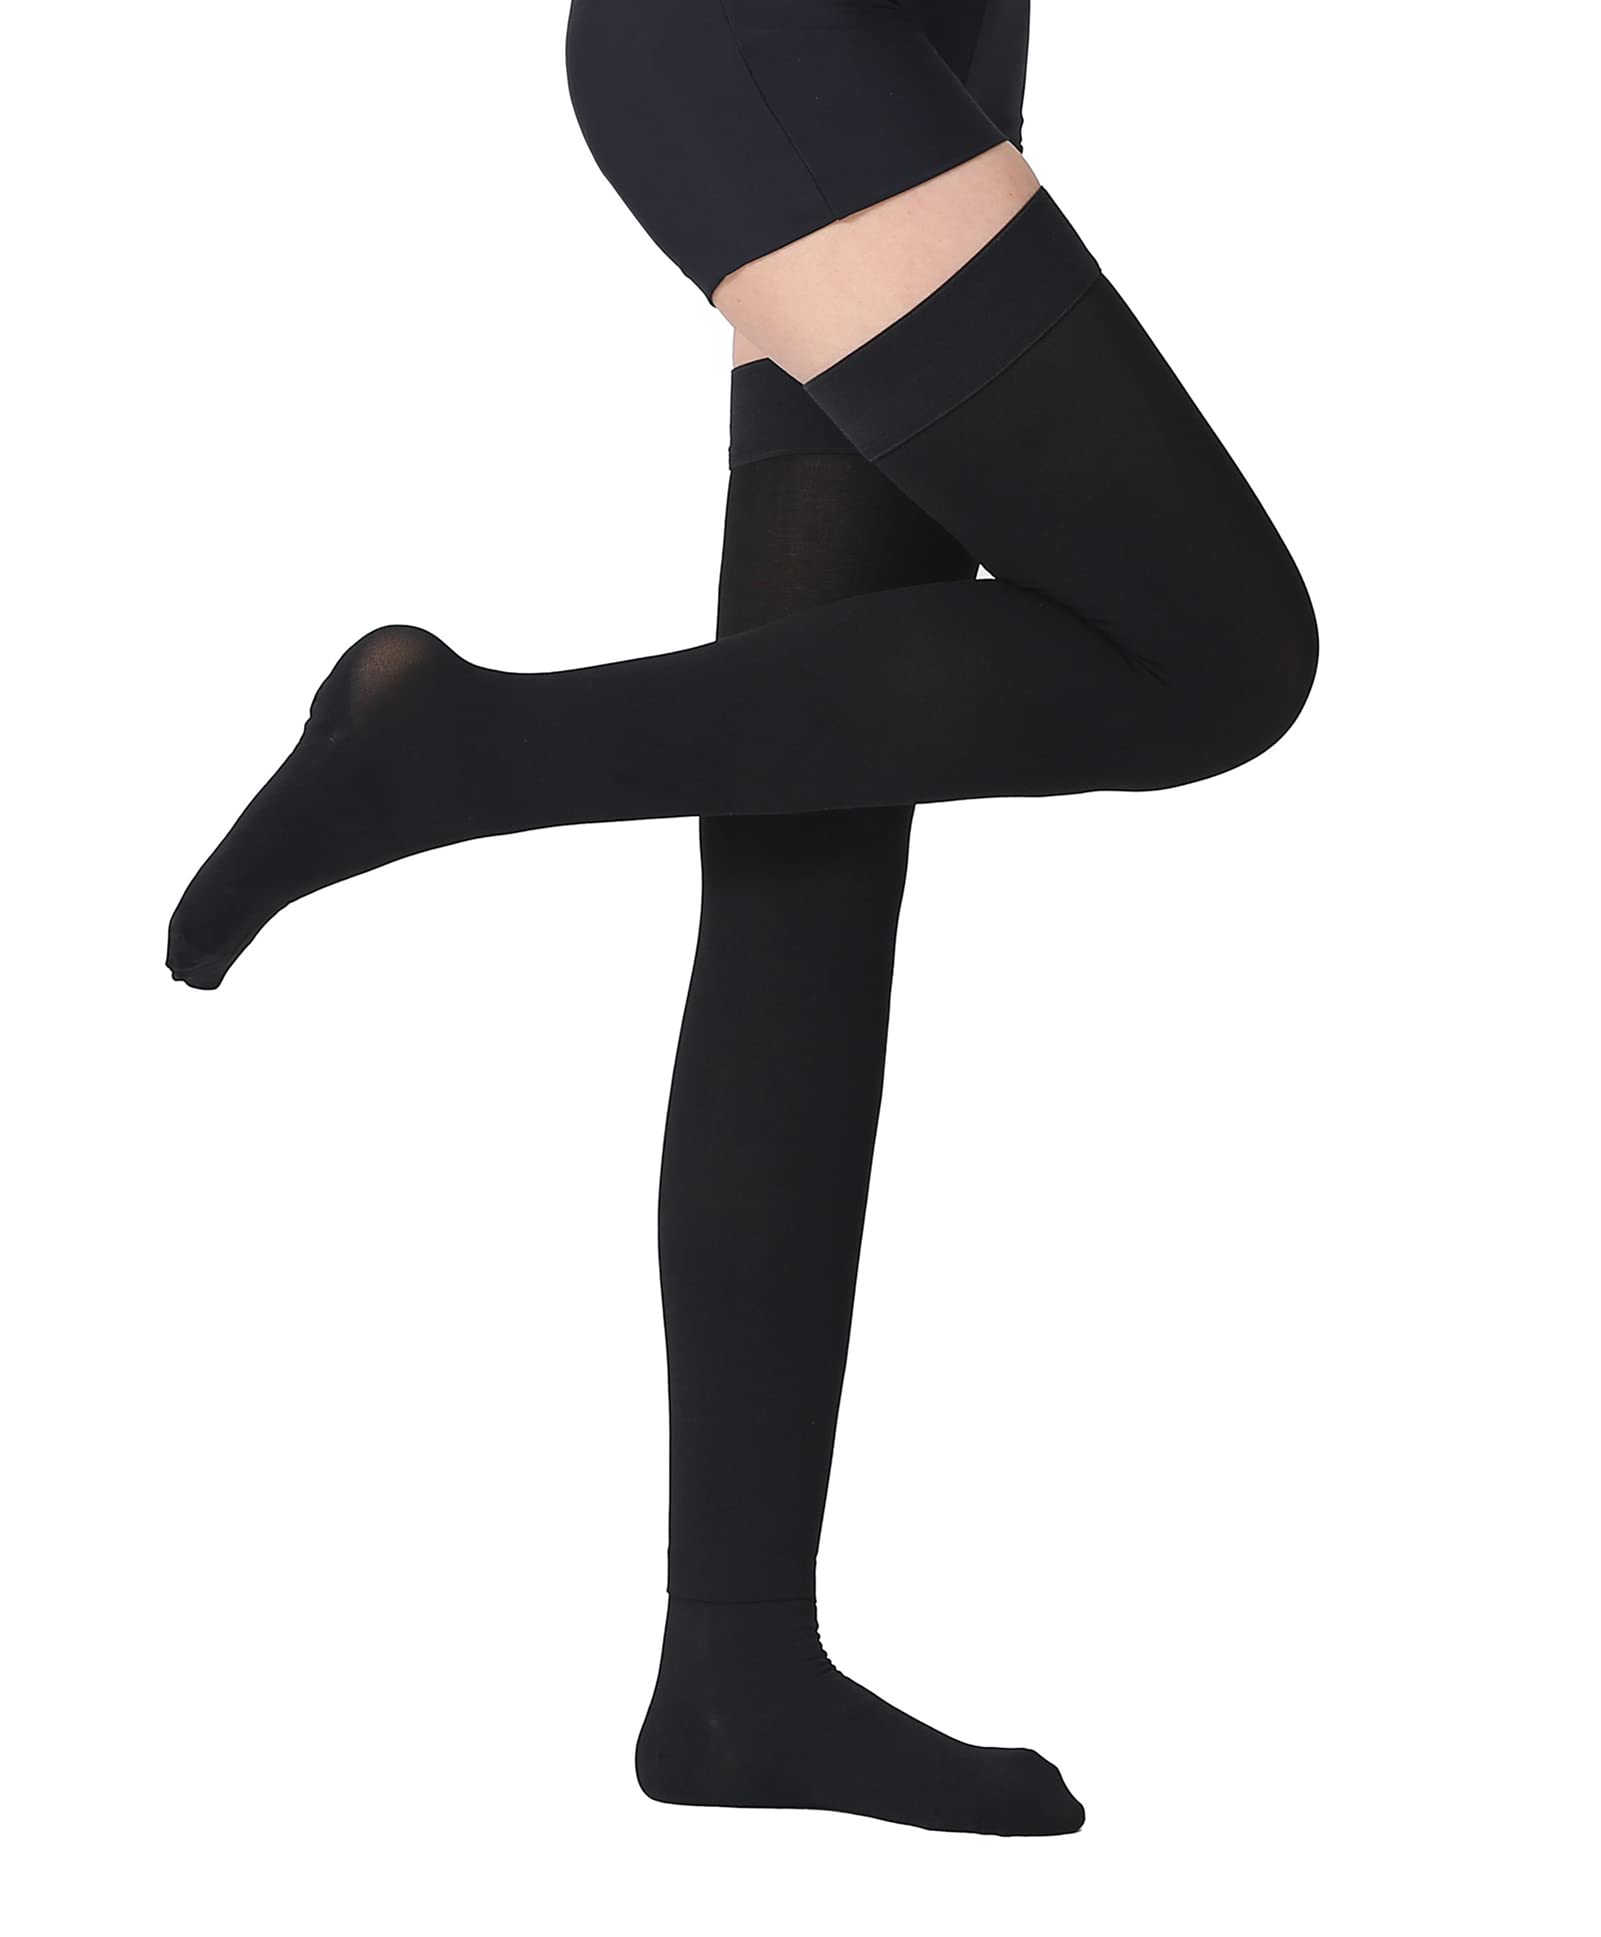  MGANG Medical Compression Pantyhose for Women & Men, 20-30mmHg  Graduated Compression Support Tights, Open Toe, Opaque Waist High  Compression Stockings for Edema, Varicose Veins, Flight, DVT, Black XL :  Health 